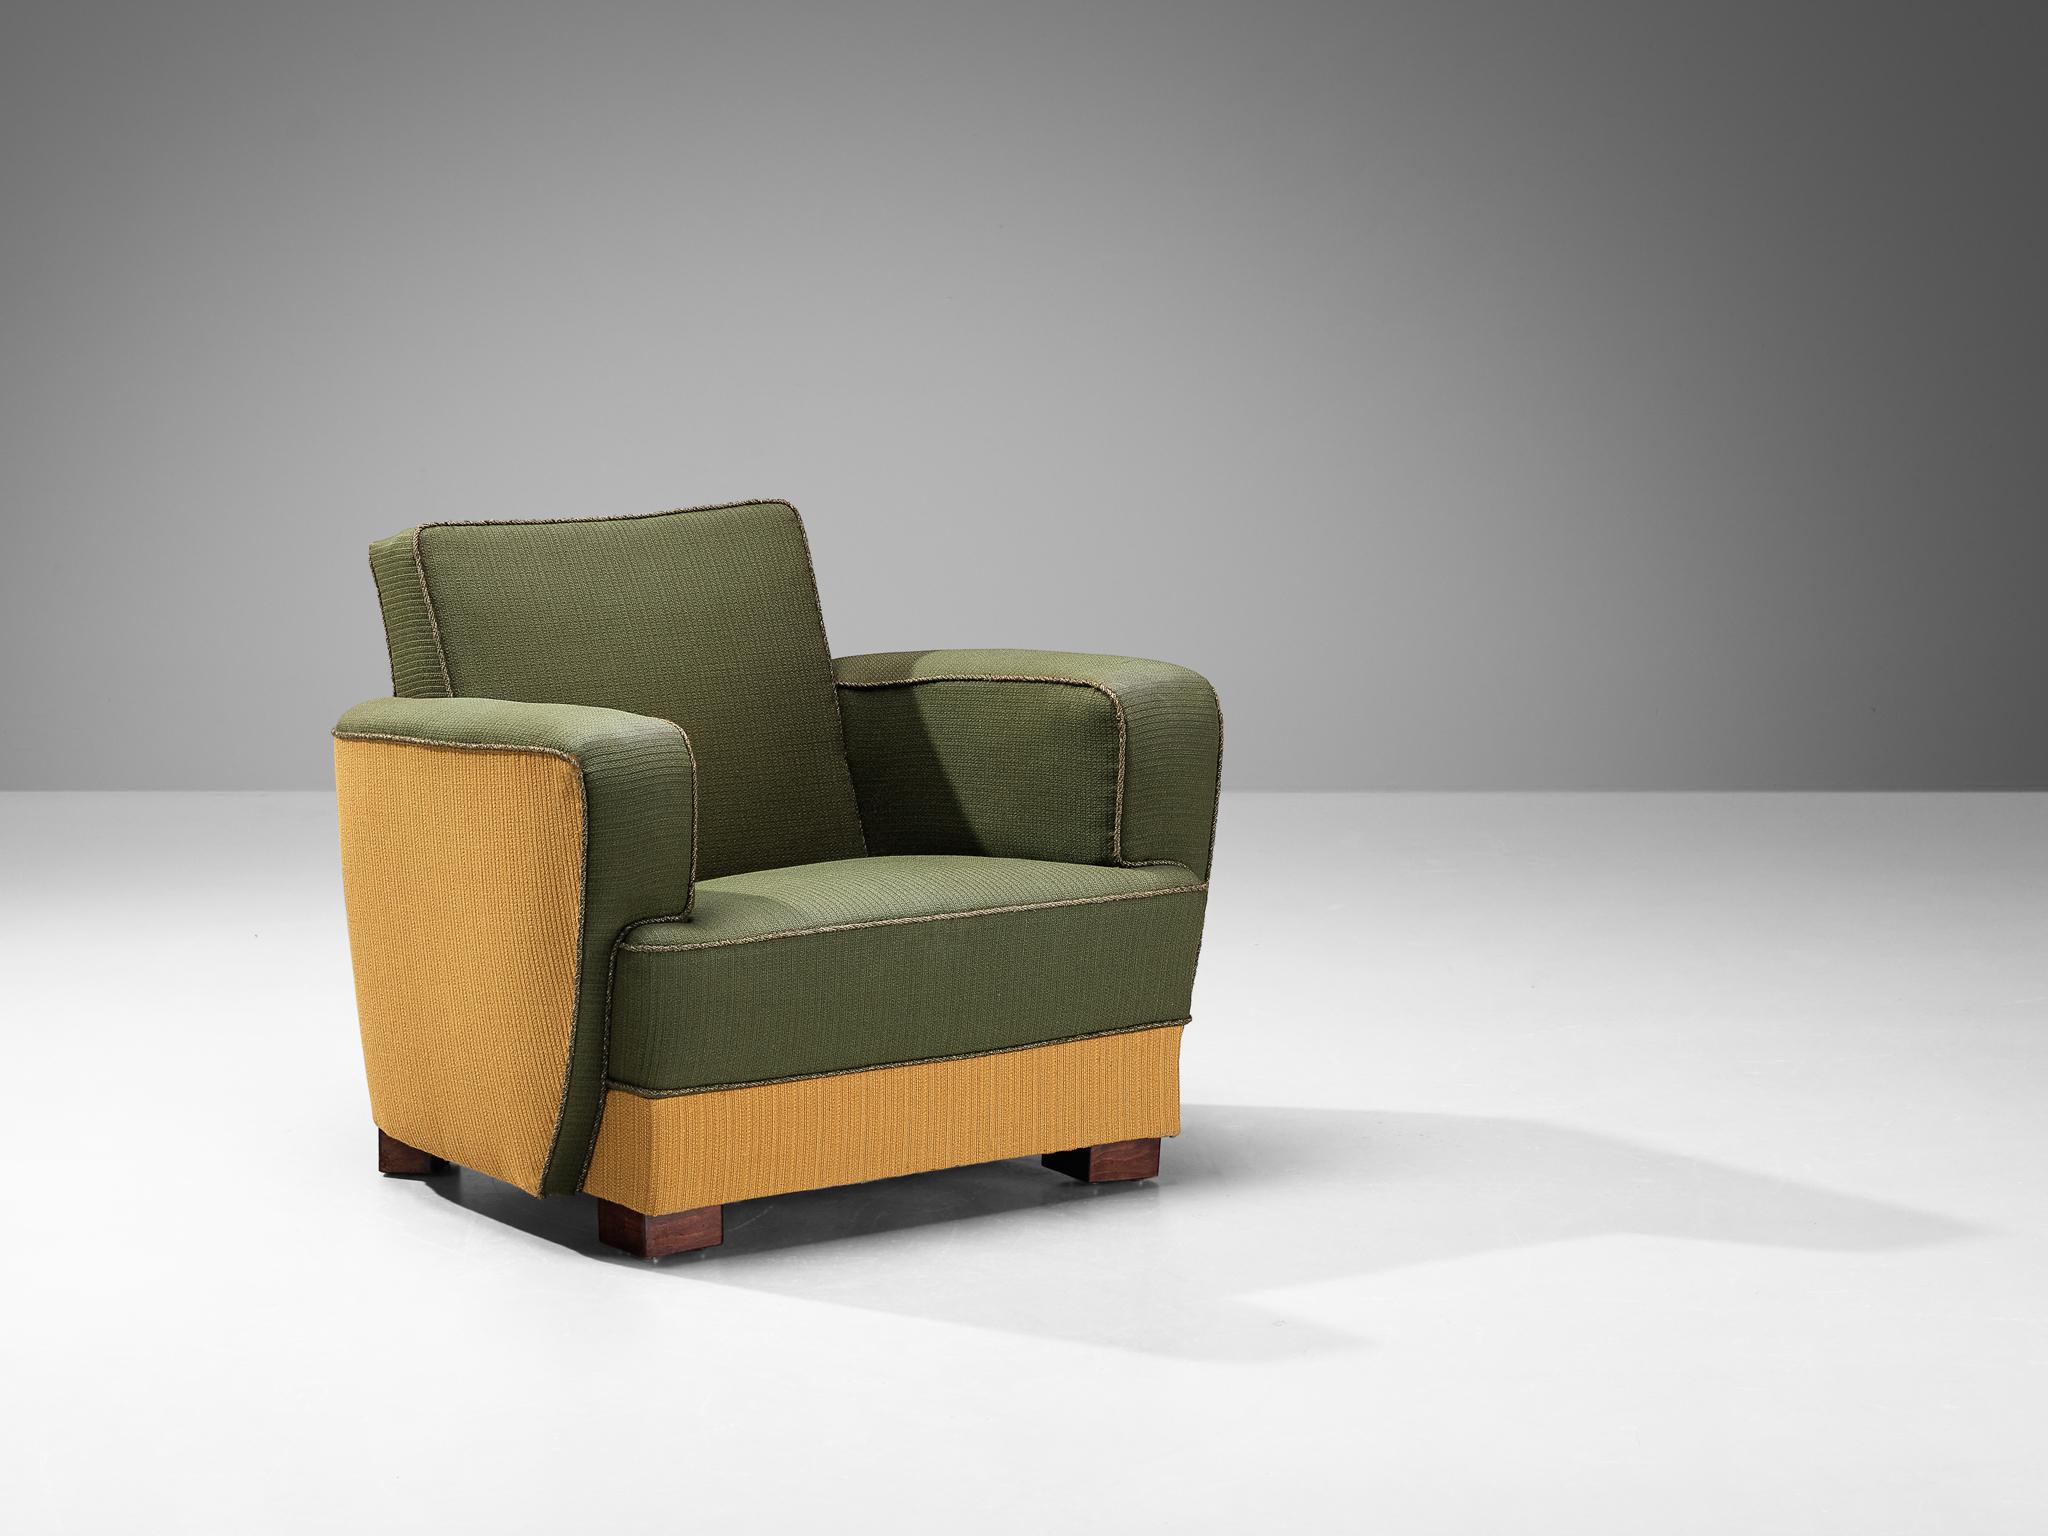 Danish cabinetmaker, lounge chair, beech, fabric, Denmark, 1930s.

This armchair is crafted by a Danish cabinetmaker and exemplifies minimalism, craftsmanship, and functionality of Scandinavian Modern design. The bulky-shaped chair is marked by a